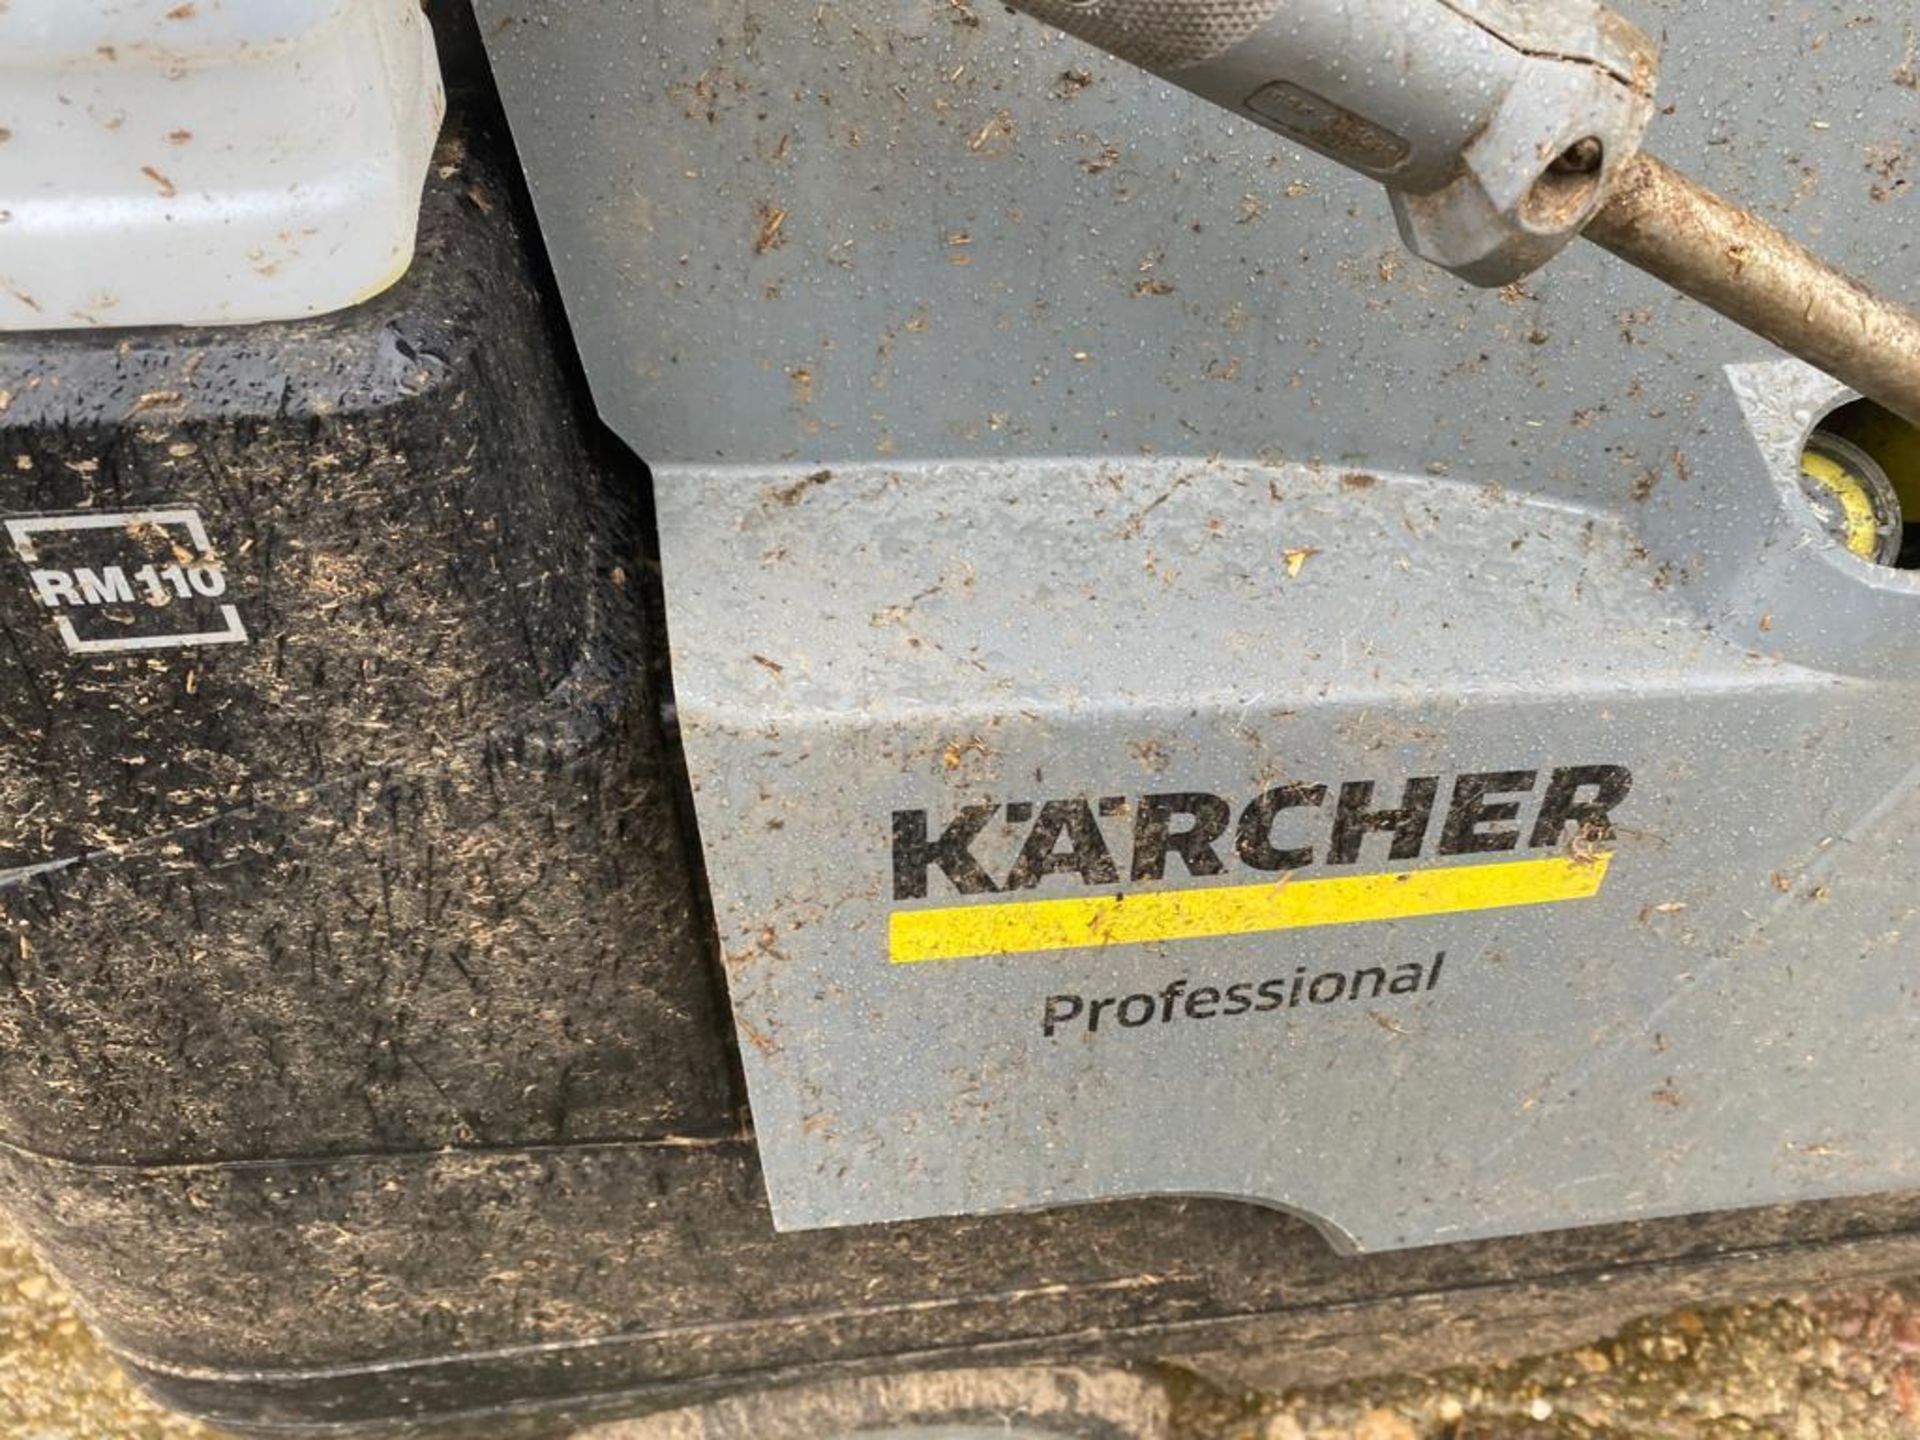 Karcher Professional Power Washer- RM 110 - Image 6 of 9